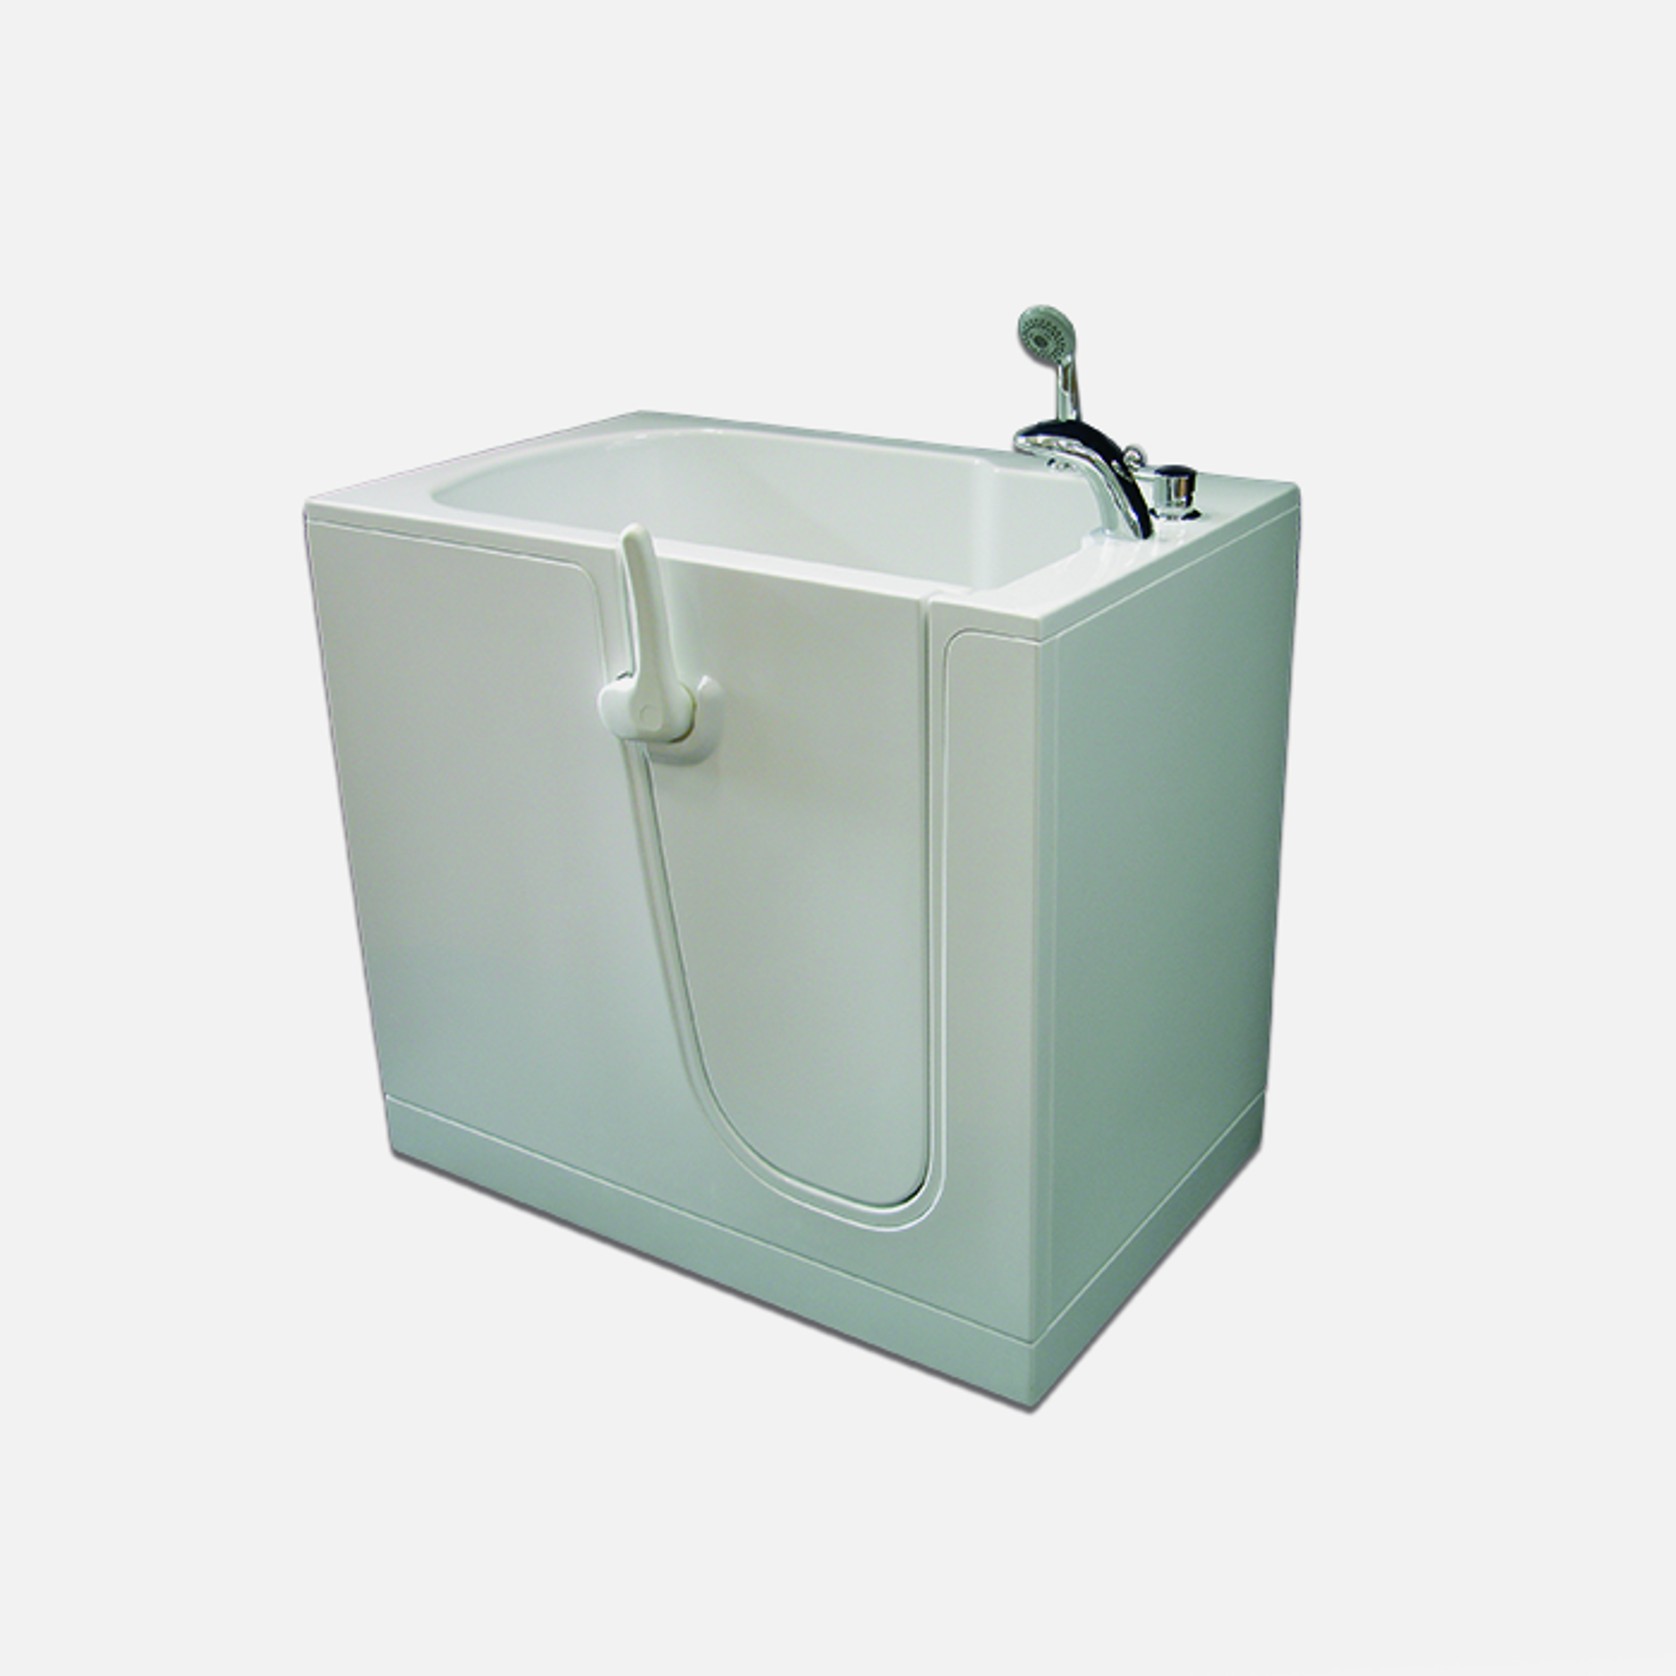 Oasi 106cm bathtub - door on the right by GOMAN gallery detail image